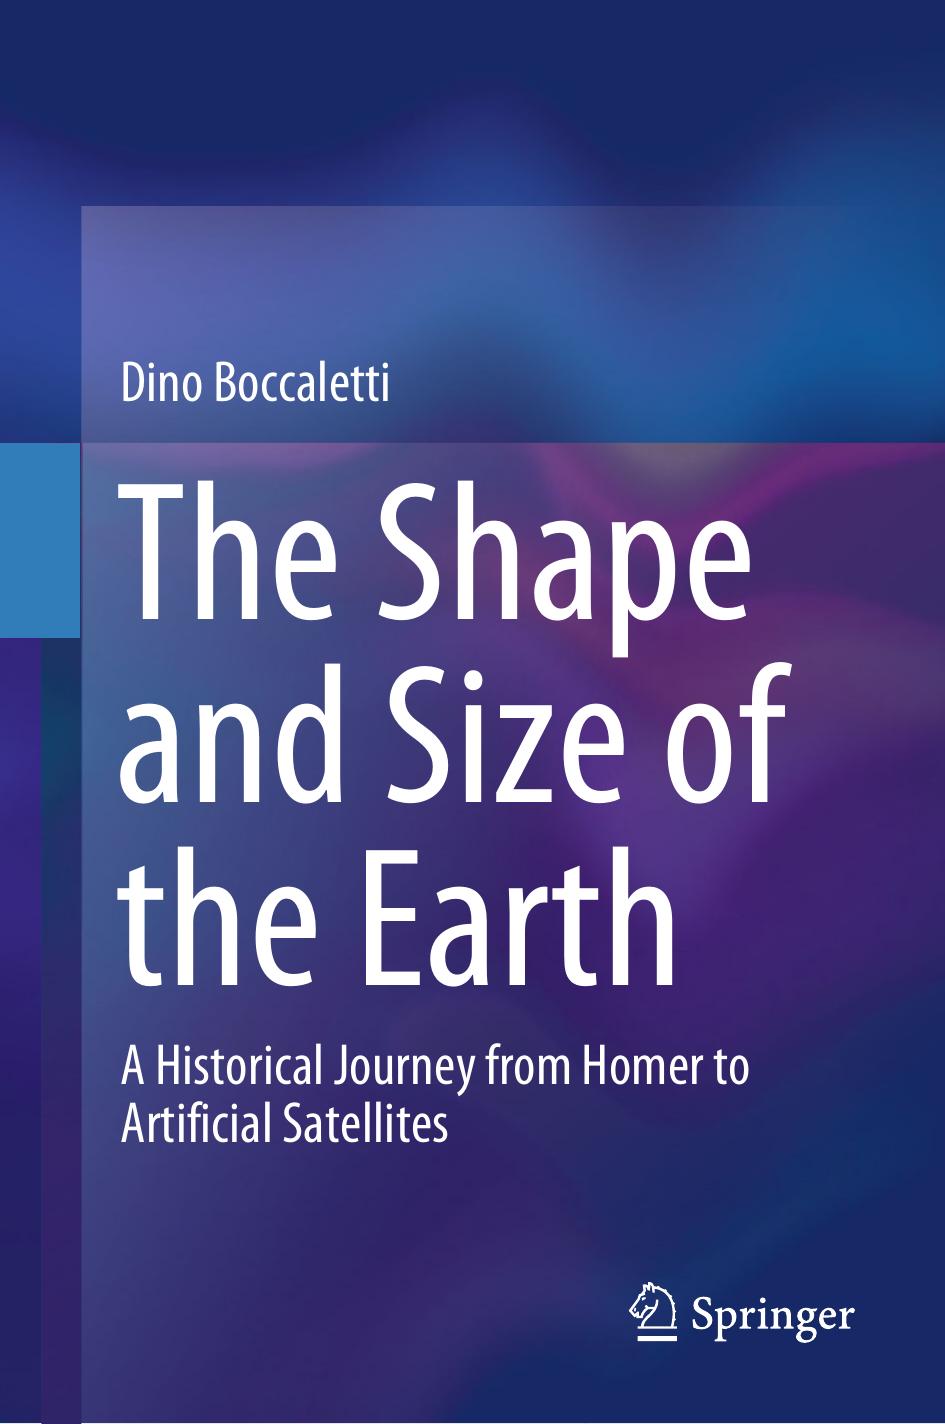 The Shape and Size of the Earth by Dino Boccaletti